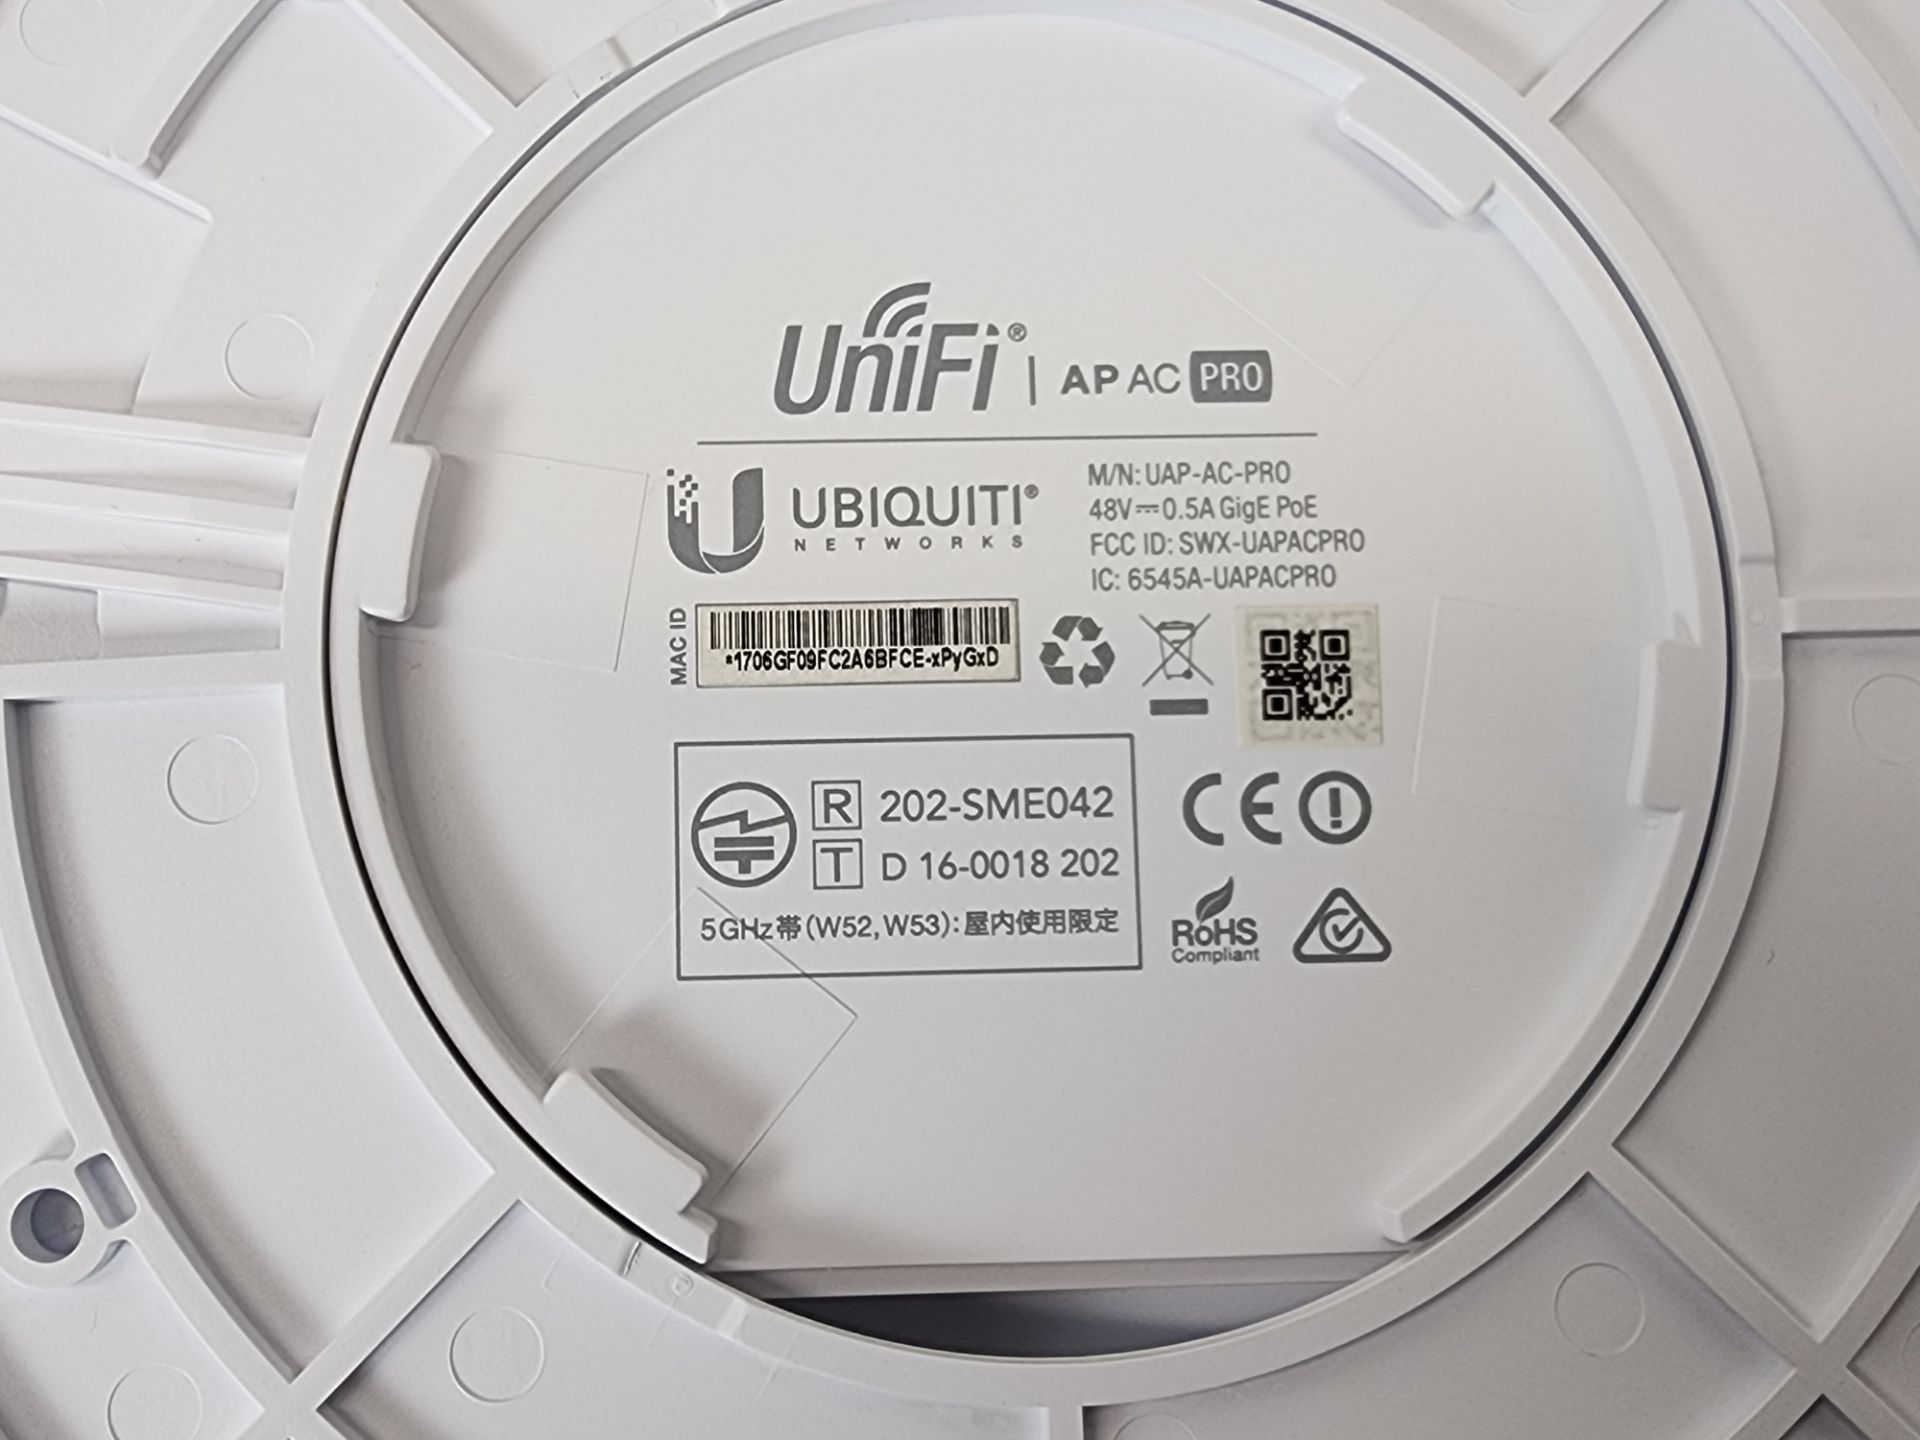 Ubiquiti UniFi Model UAP-AC-Pro Dual Band Access Point, 2.4 GHz & 5 GHz Bands, w/Ceiling & Wall - Image 3 of 3